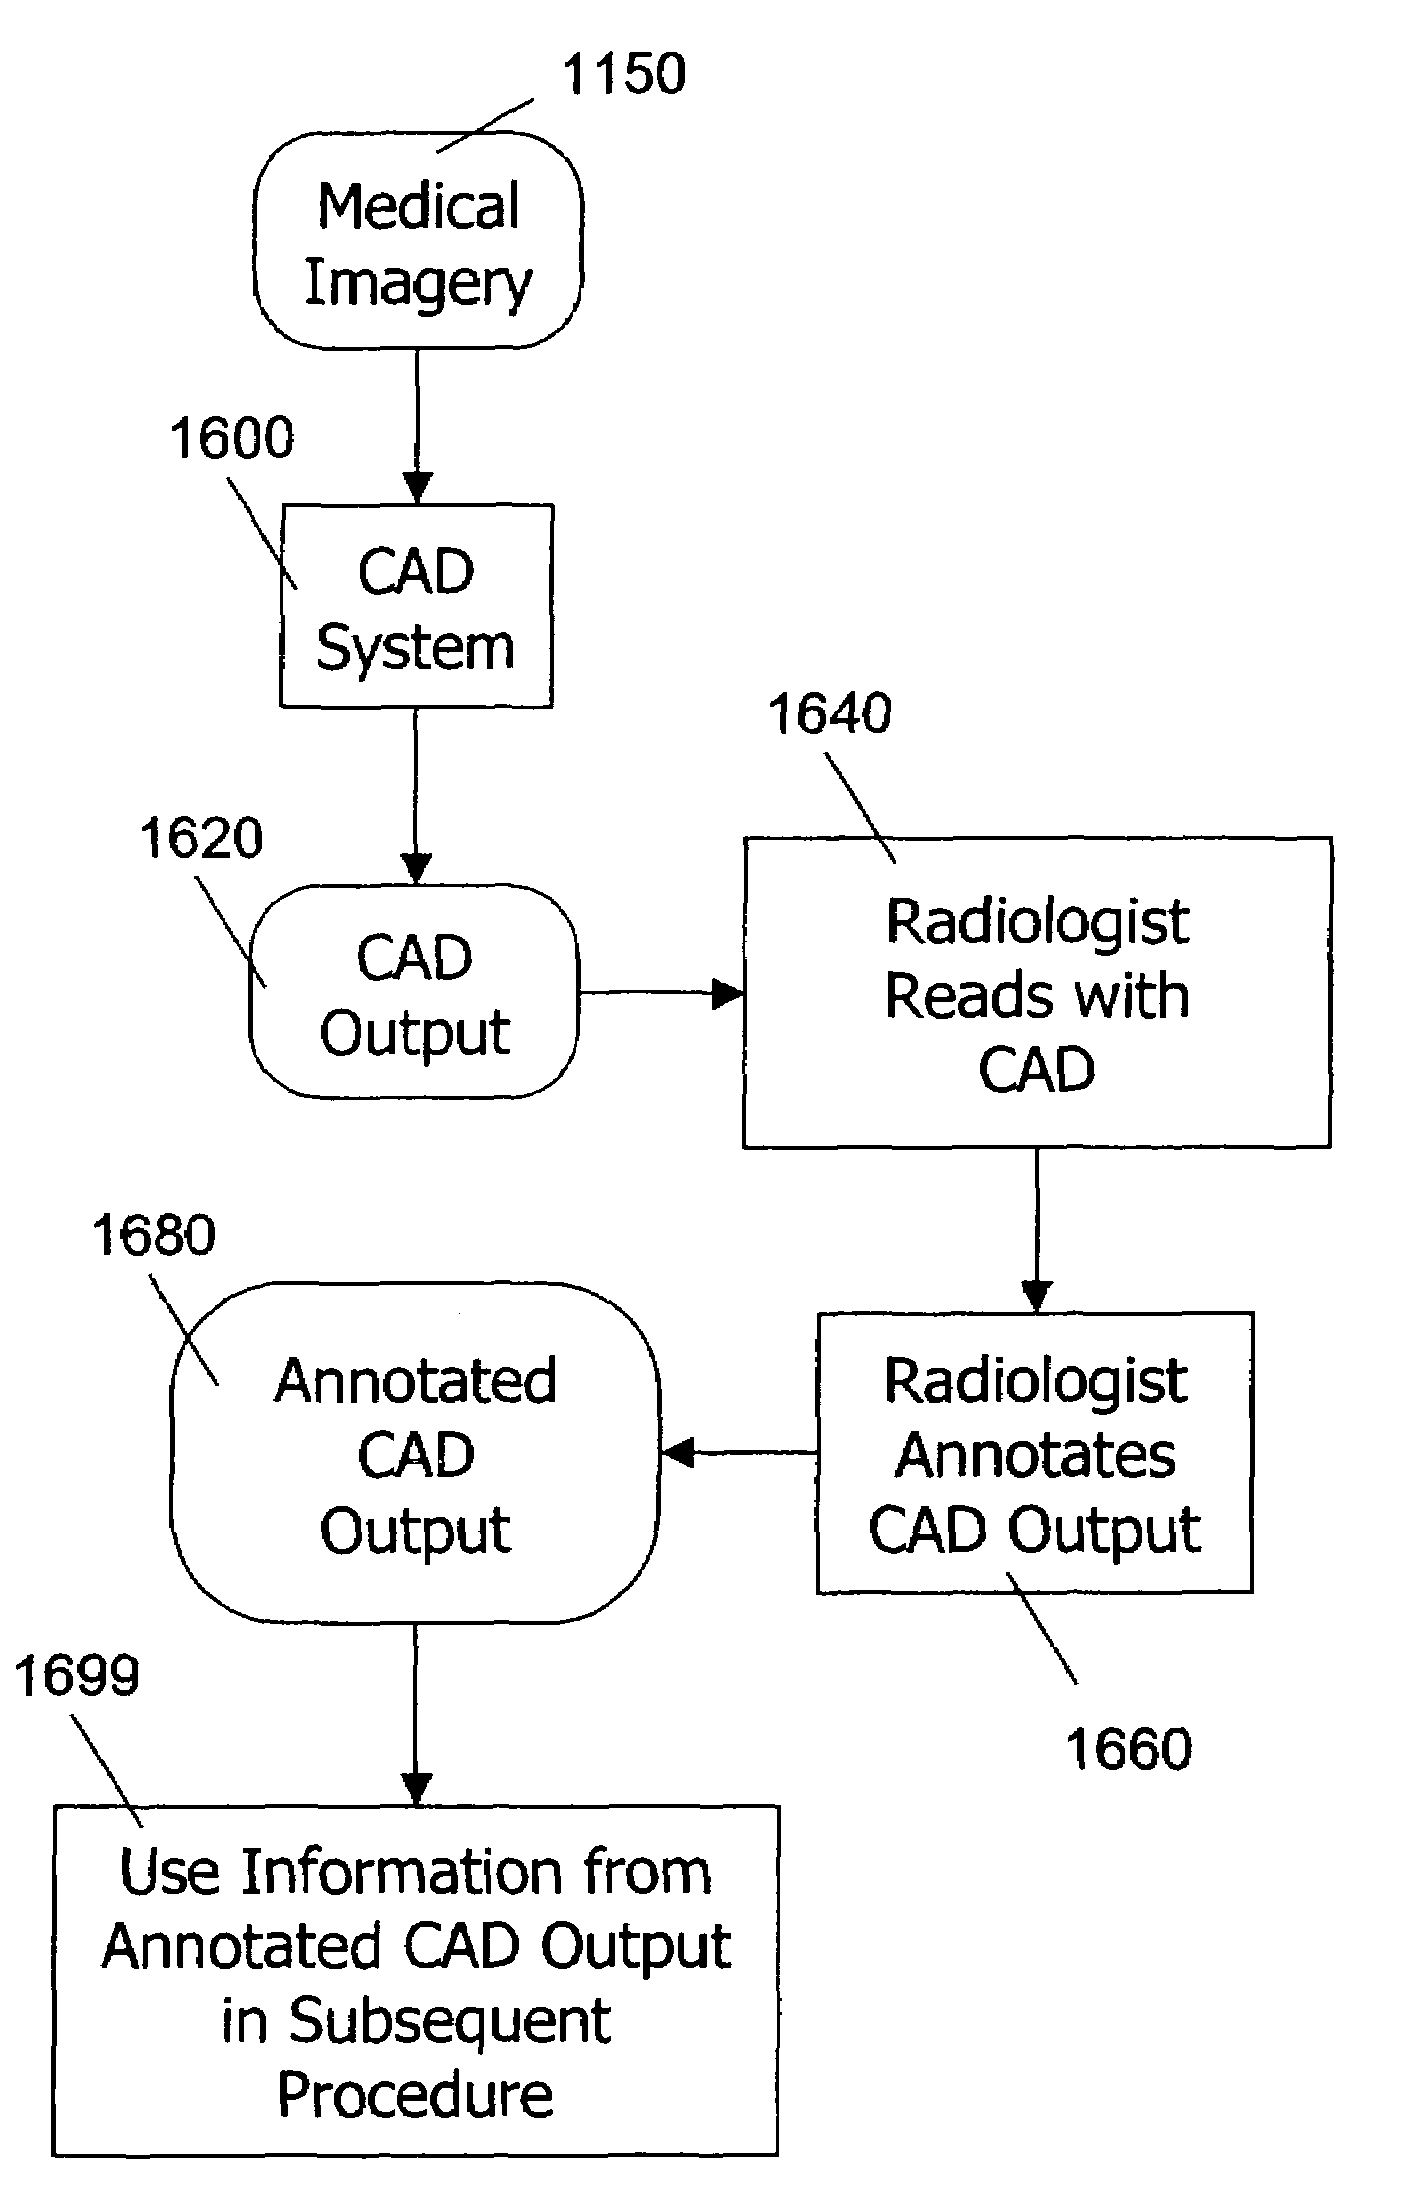 Use of computer-aided detection system outputs in clinical practice